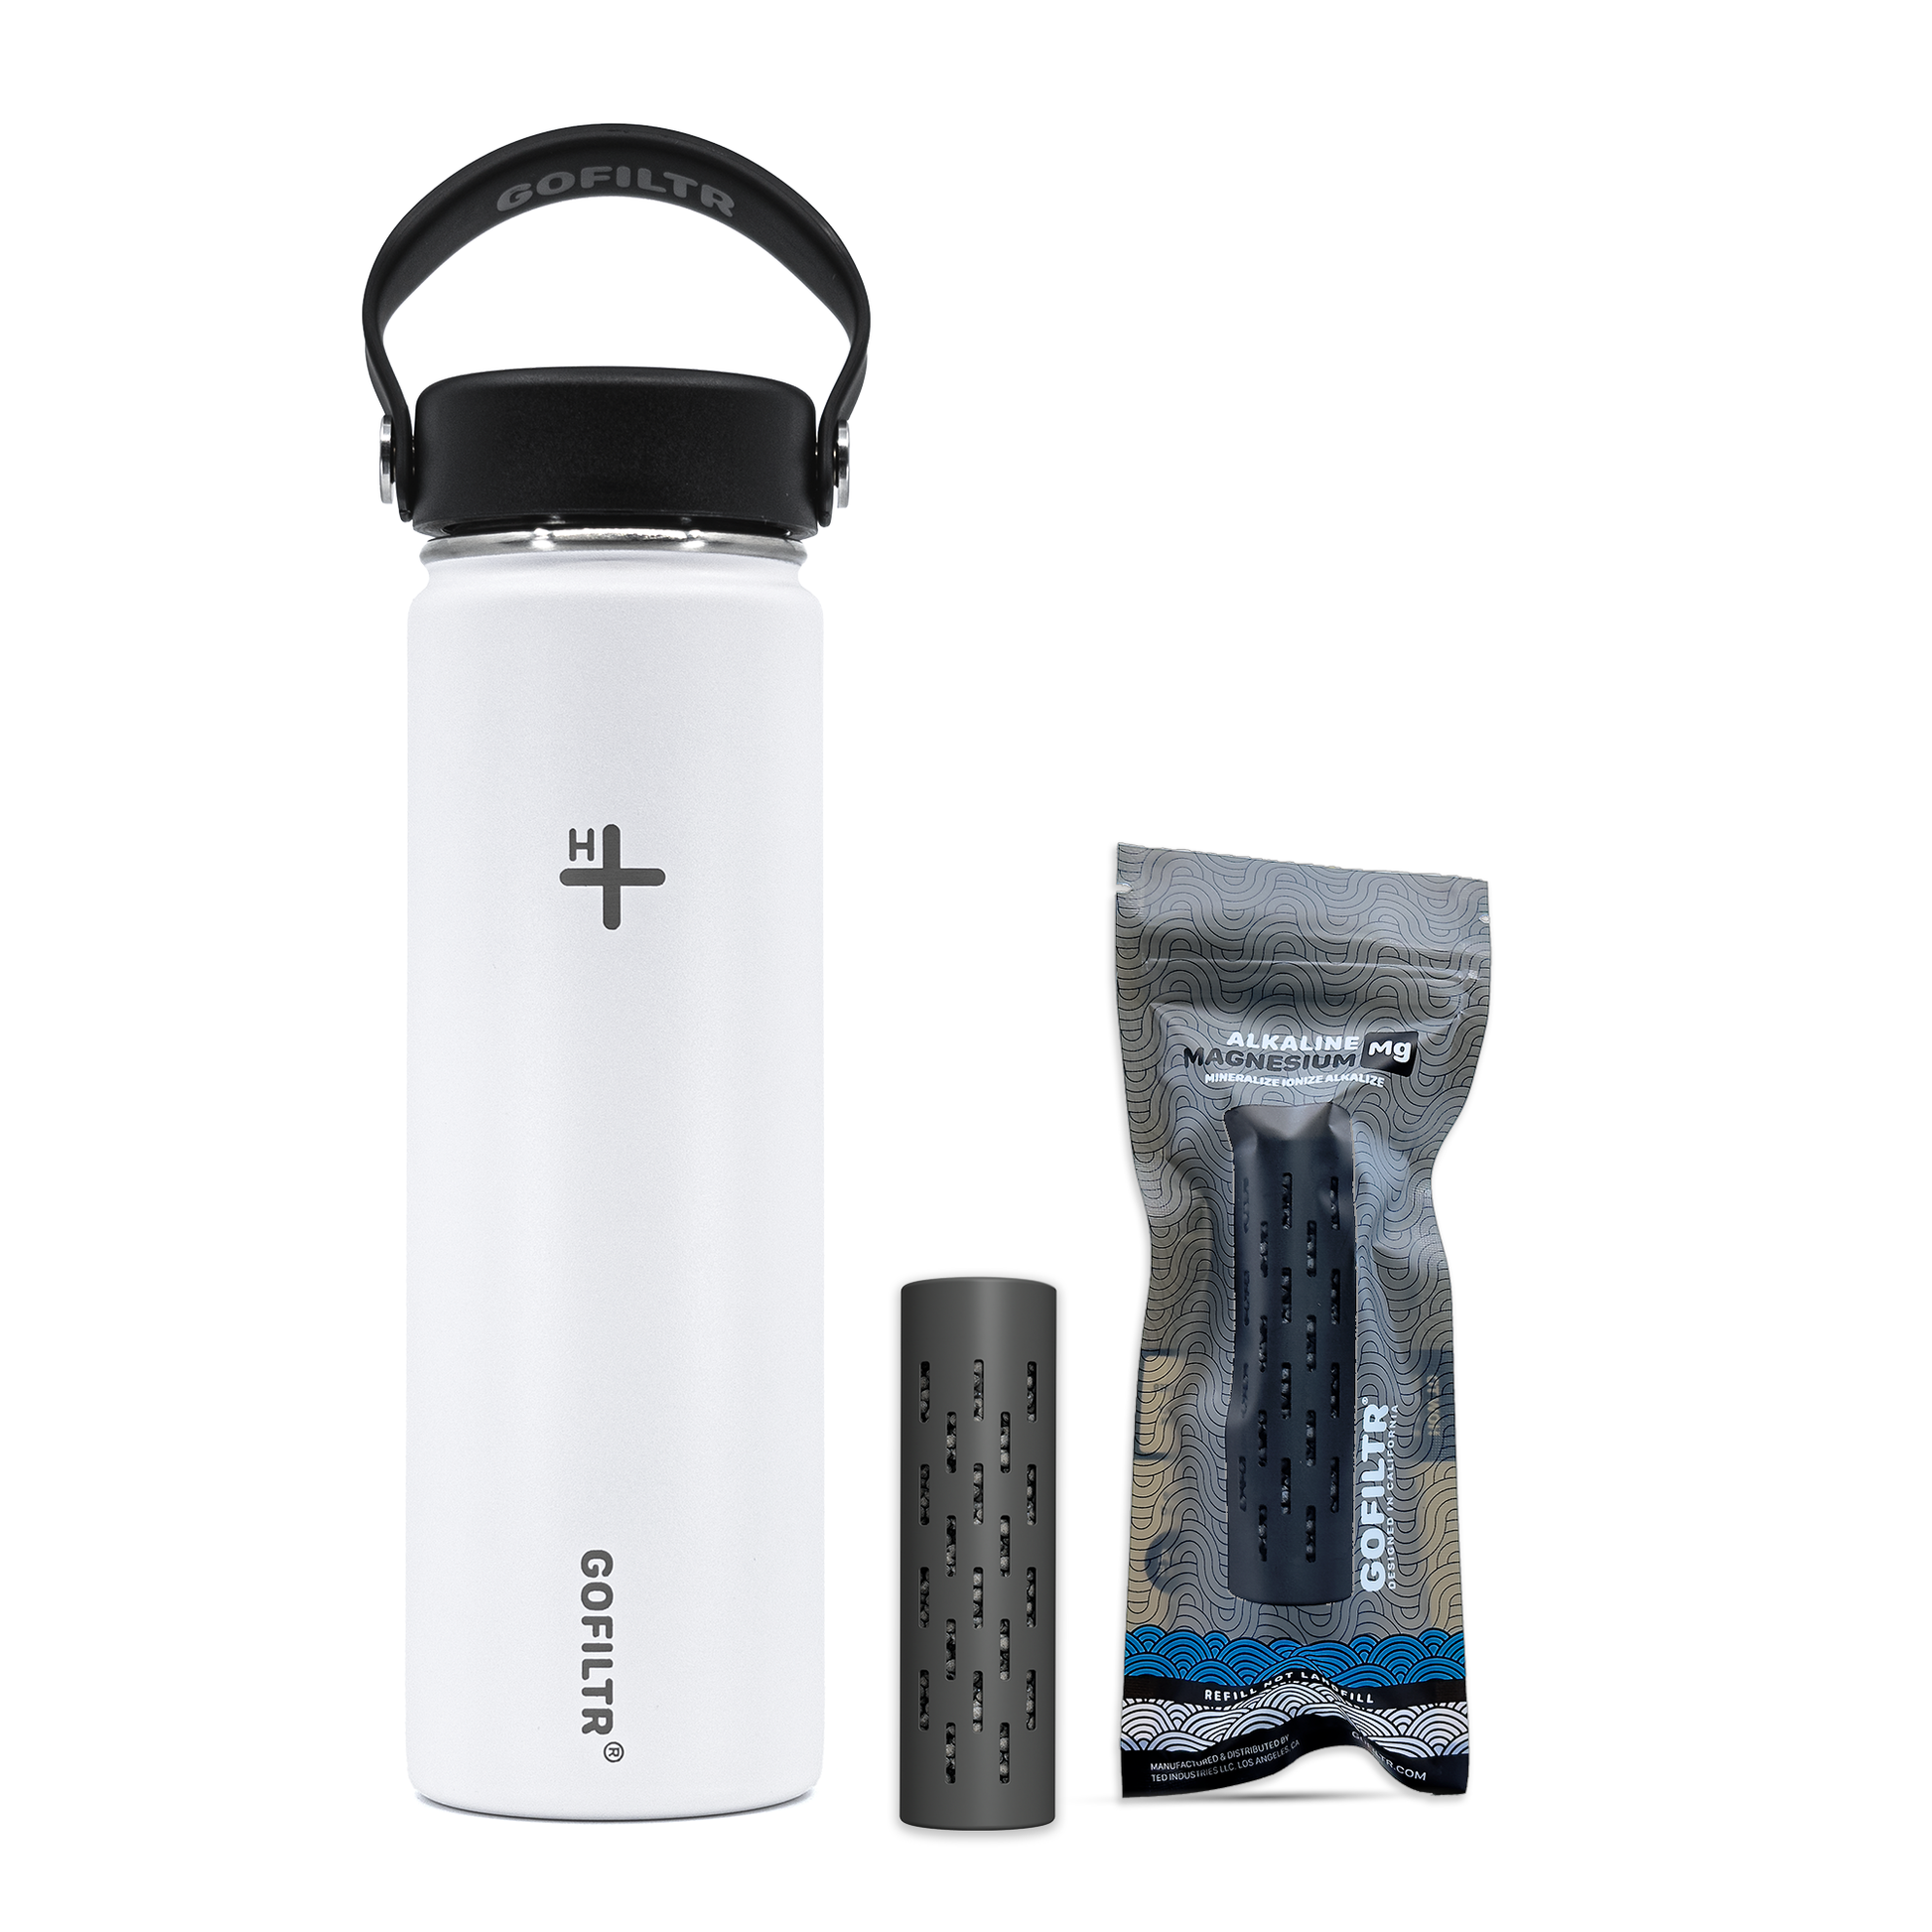 GOFILTR 50 oz Alkaline Magnesium Water Bottle Kit | 2 Magnesium Mineral Water Infusers + 50 oz Insulated Stainless Steel Water Bottle Jug (Cotton /